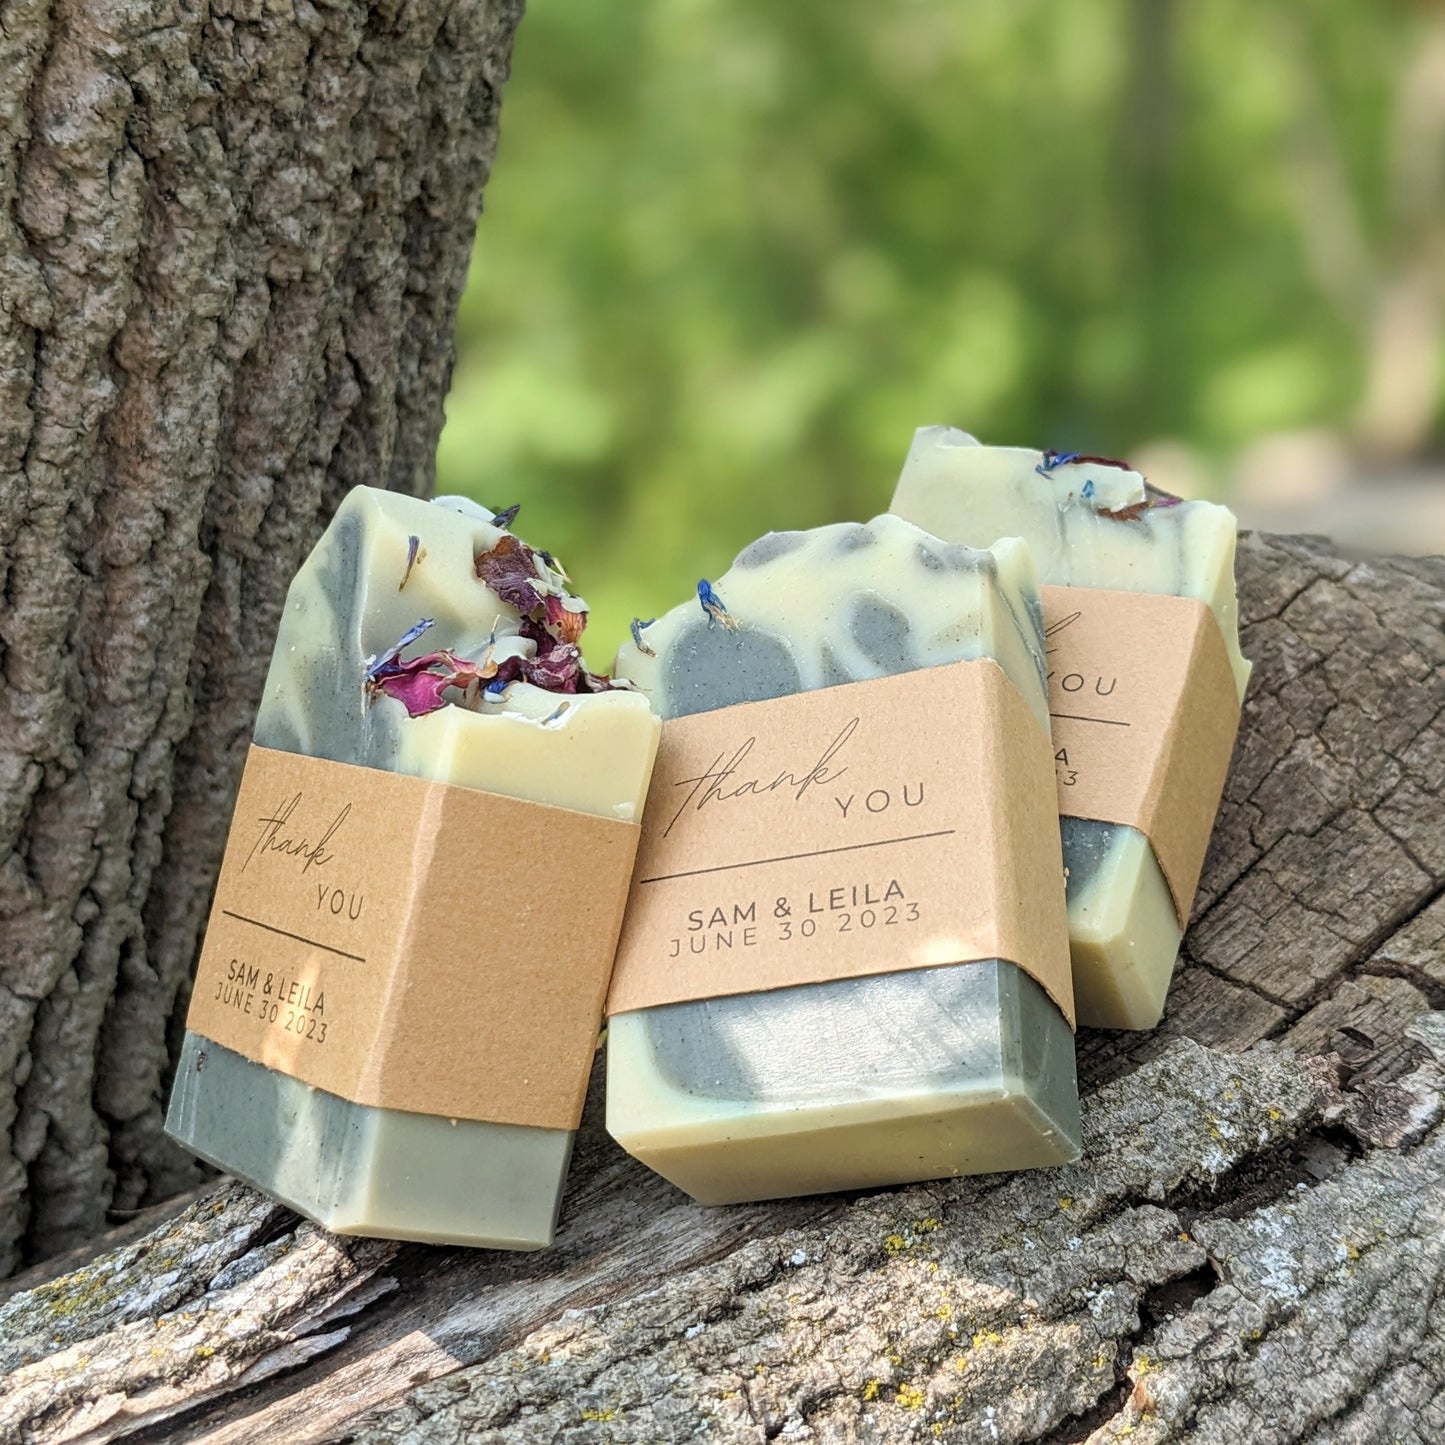 Soap Favors | Set of 20 Half Bar (2 oz) Soaps for Weddings, Showers, or Airbnb Guests